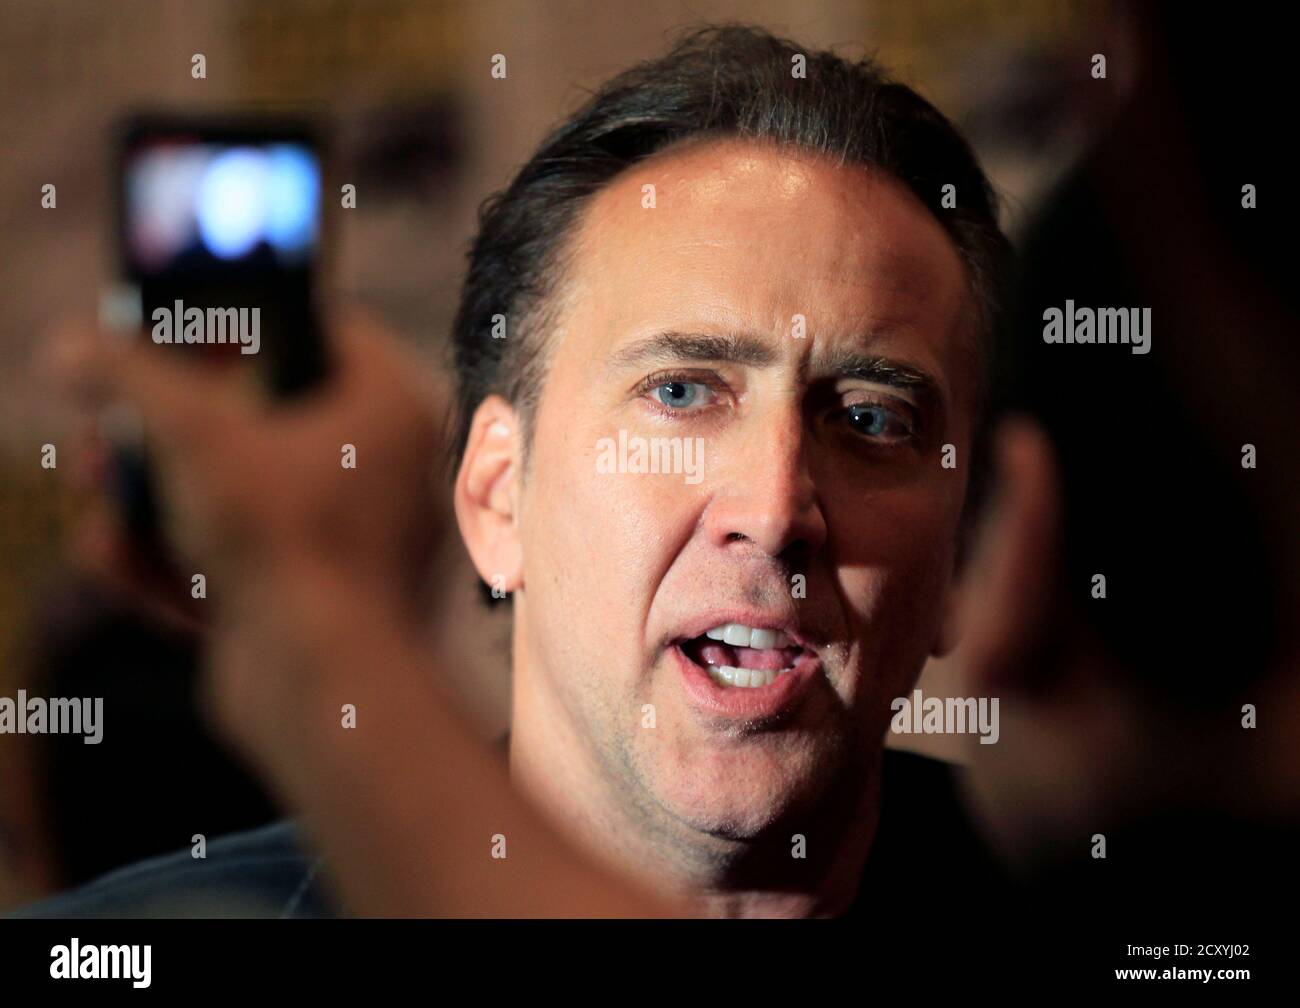 Actor Nicolas Cage is interviewed at Comic Con as he promotes his movie Ghost Rider 'Spirit of Vengeance' at the pop culture event in San Diego, California July 22, 2011.   REUTERS/Mike Blake  (UNITED STATES - Tags: ENTERTAINMENT SOCIETY PROFILE) Stock Photo